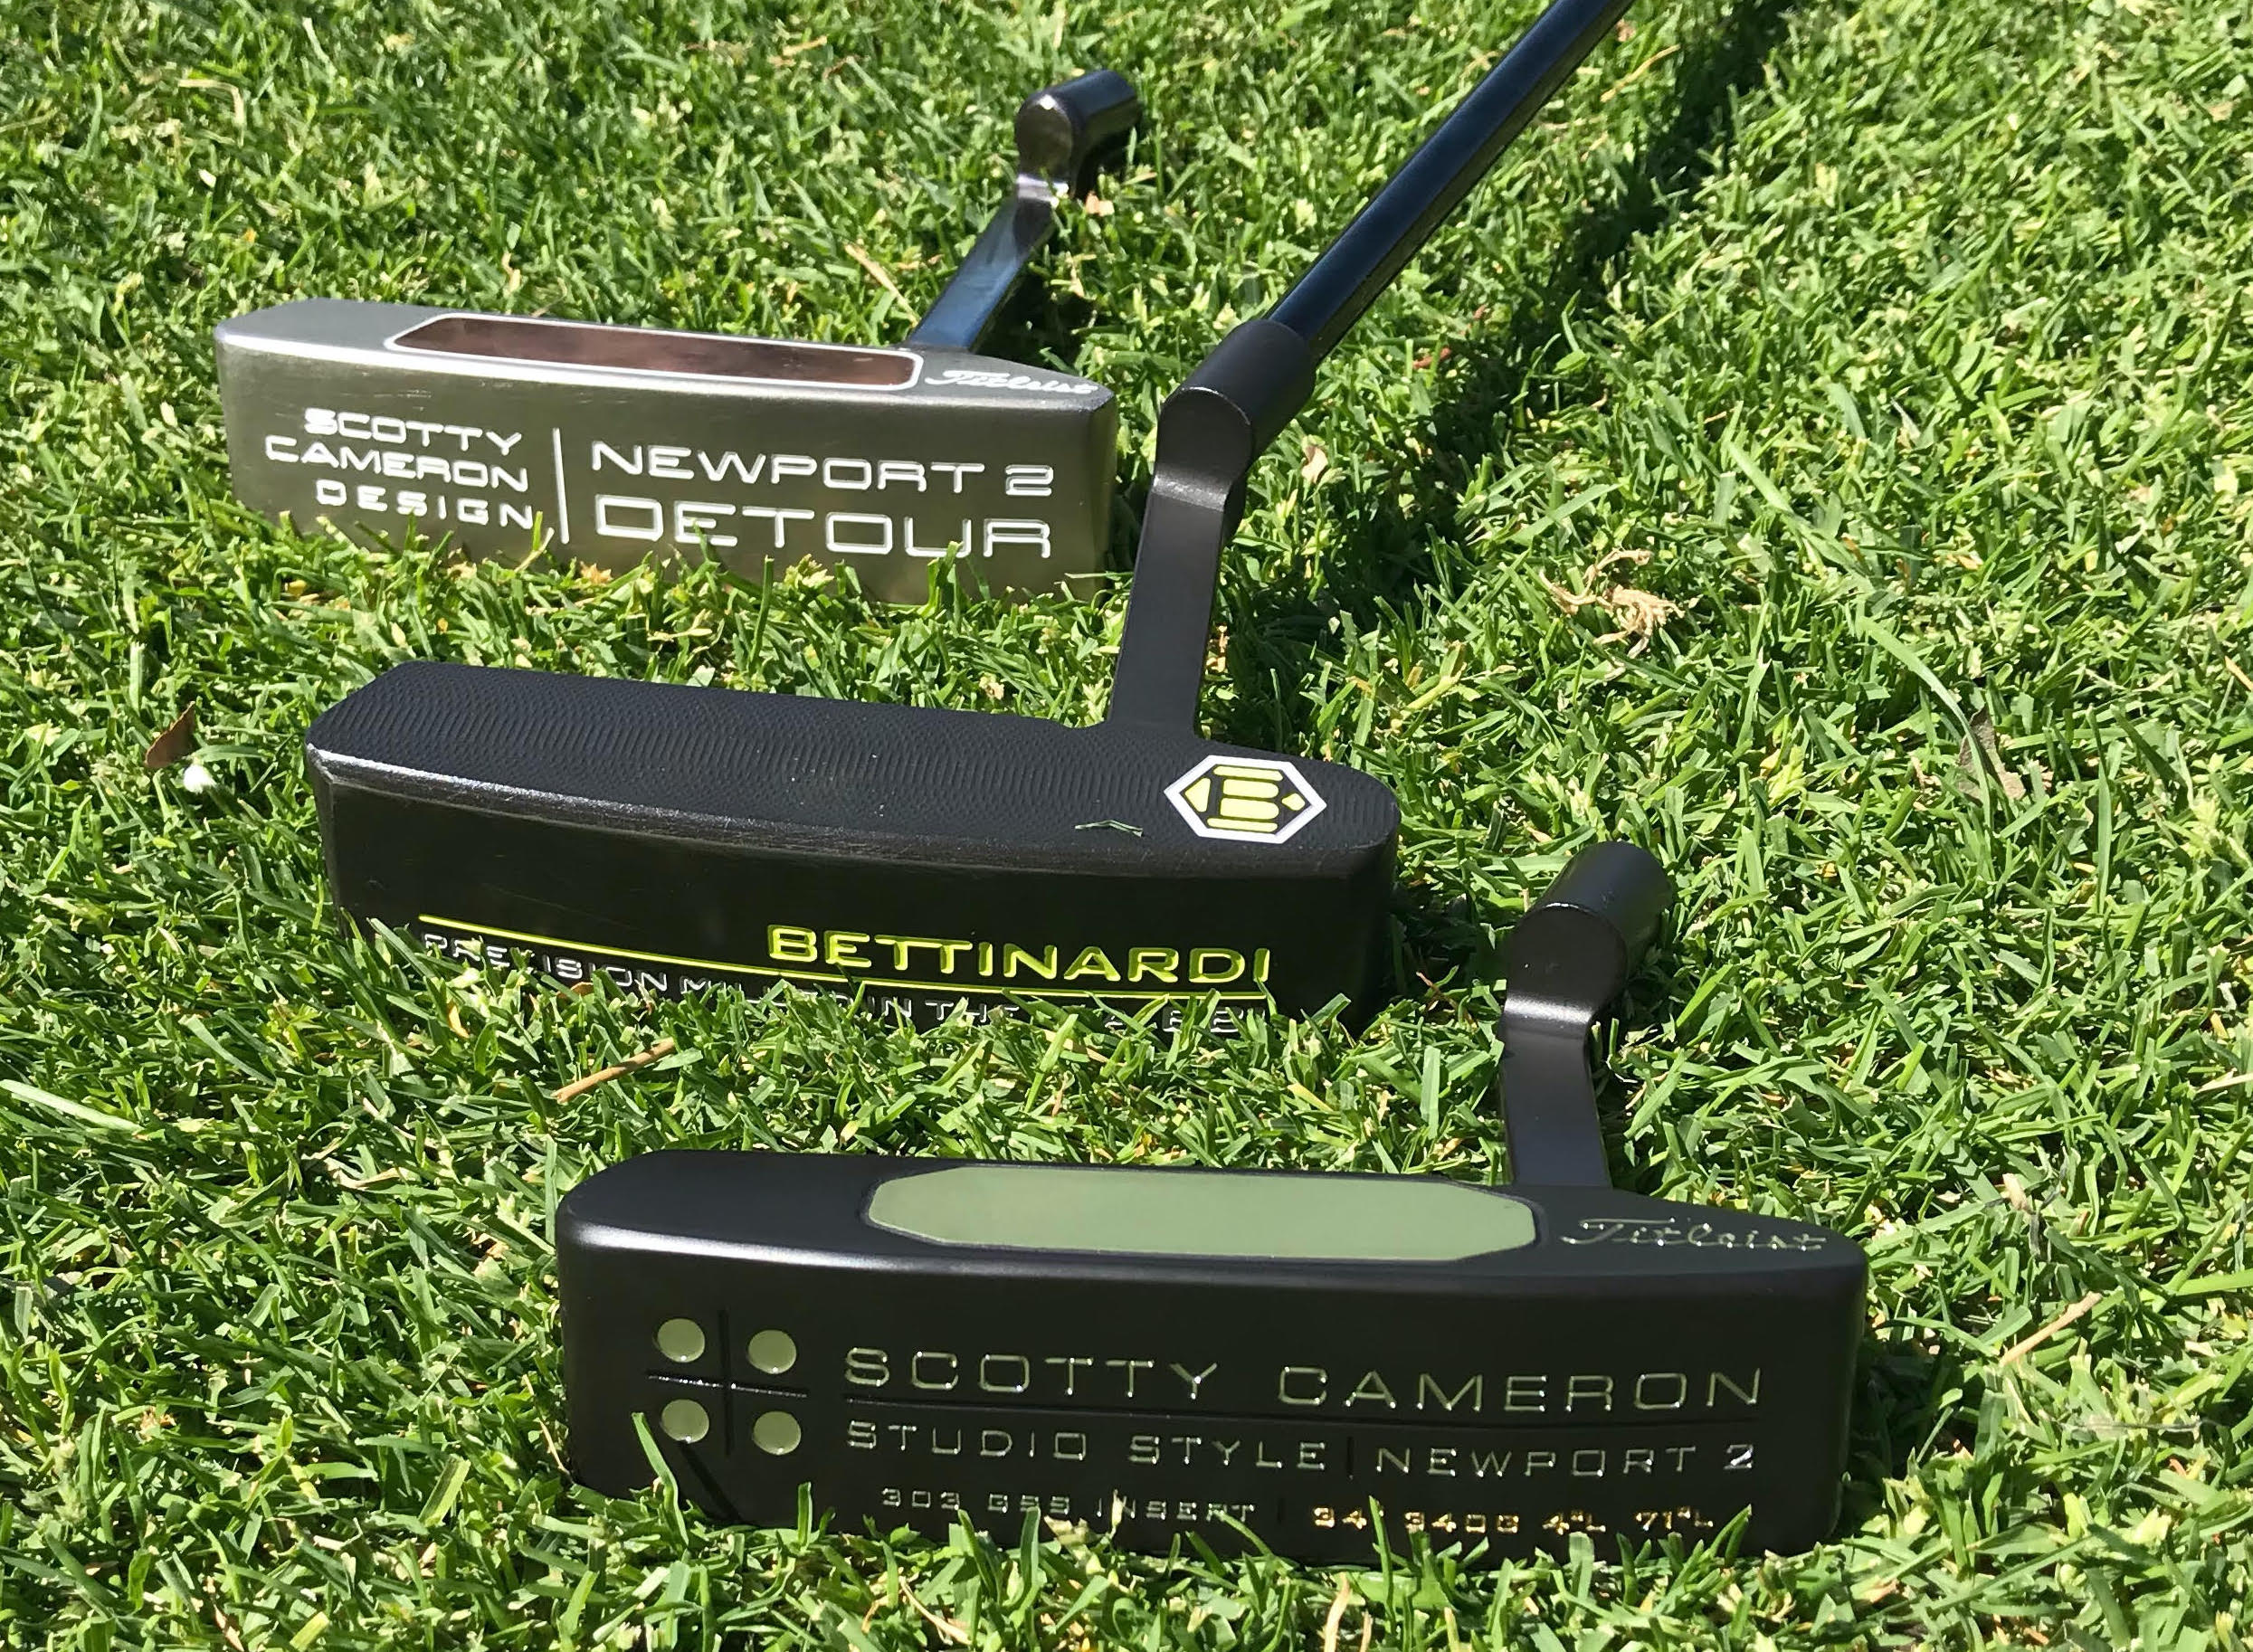 Thinking of buying a new putter? Why you might want to try refinishing instead